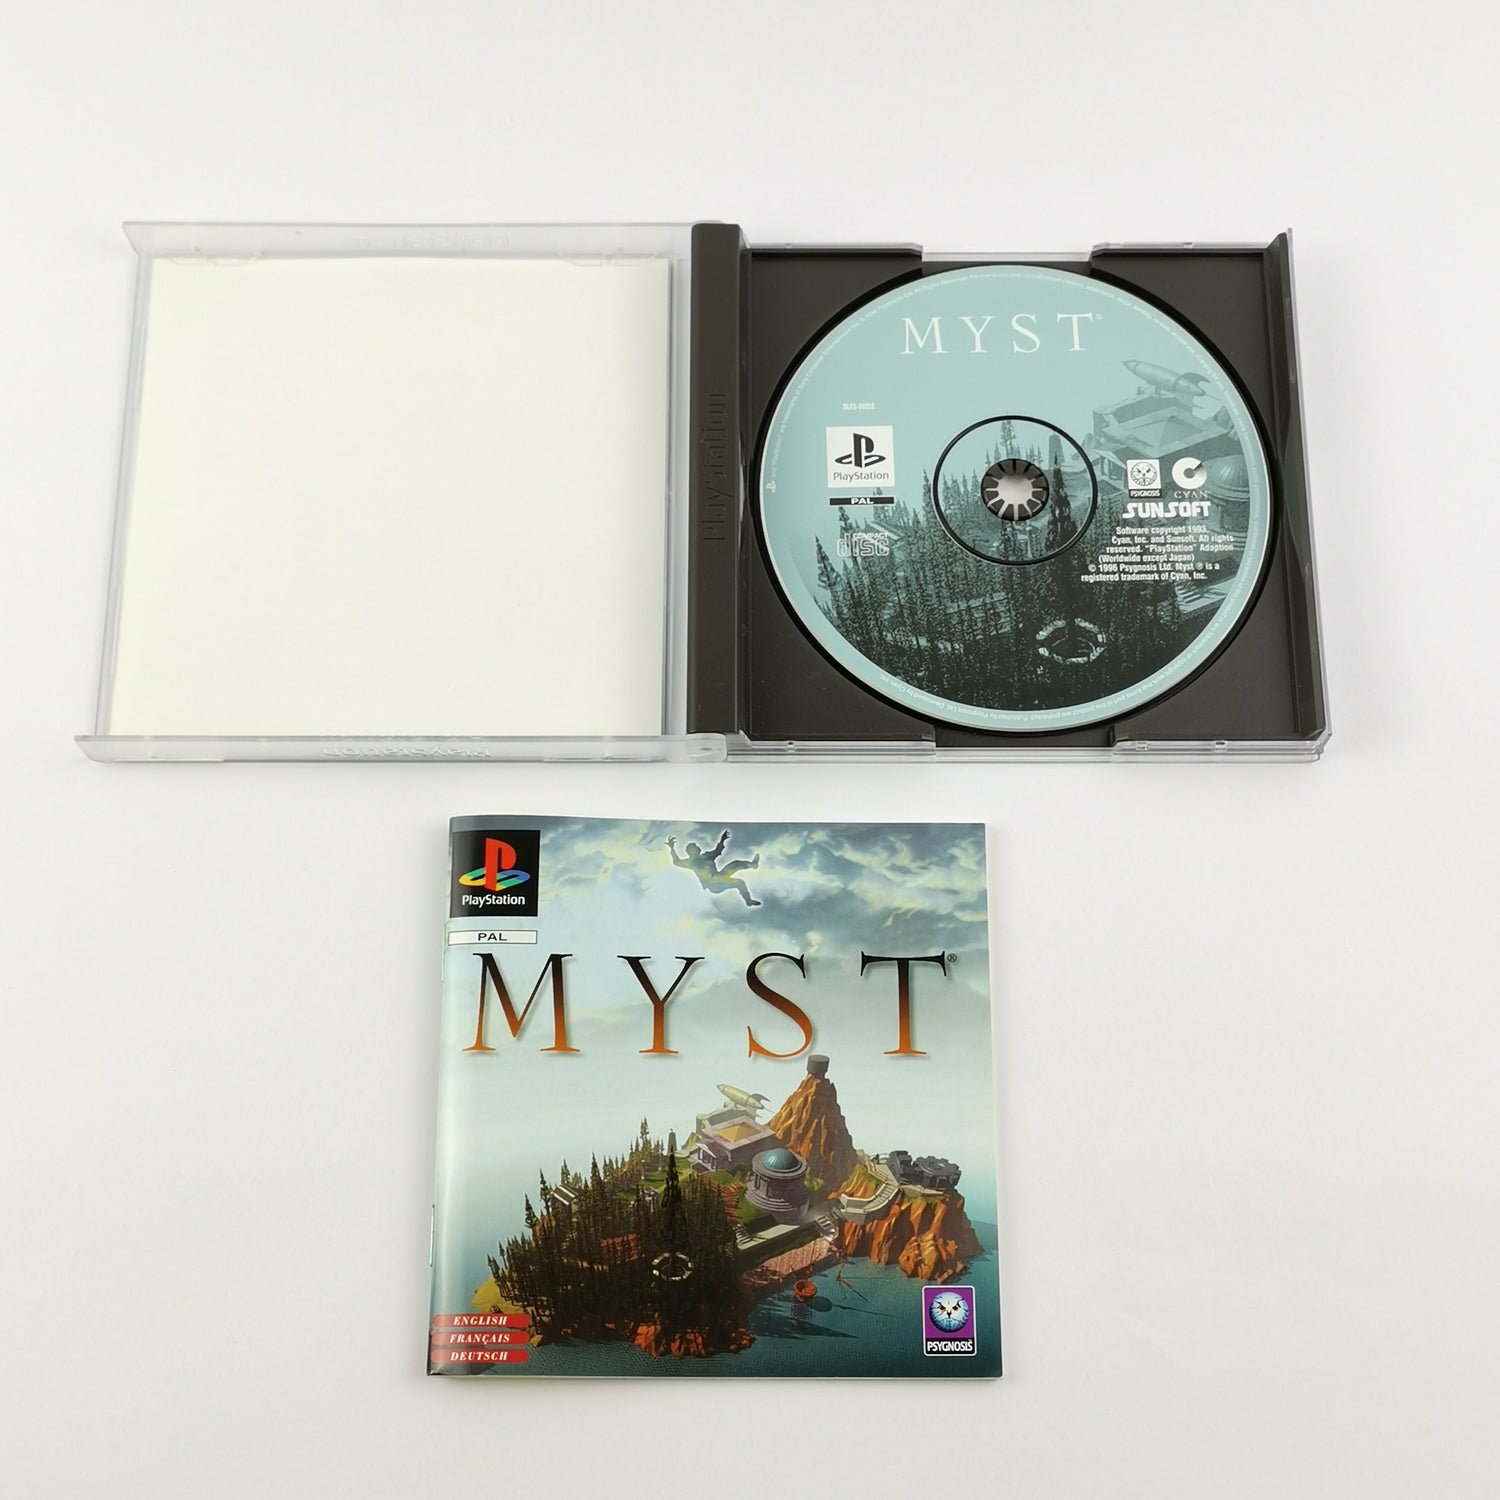 Sony Playstation 1 Game: Myst - Original Packaging & Instructions | PS1 PSX PAL